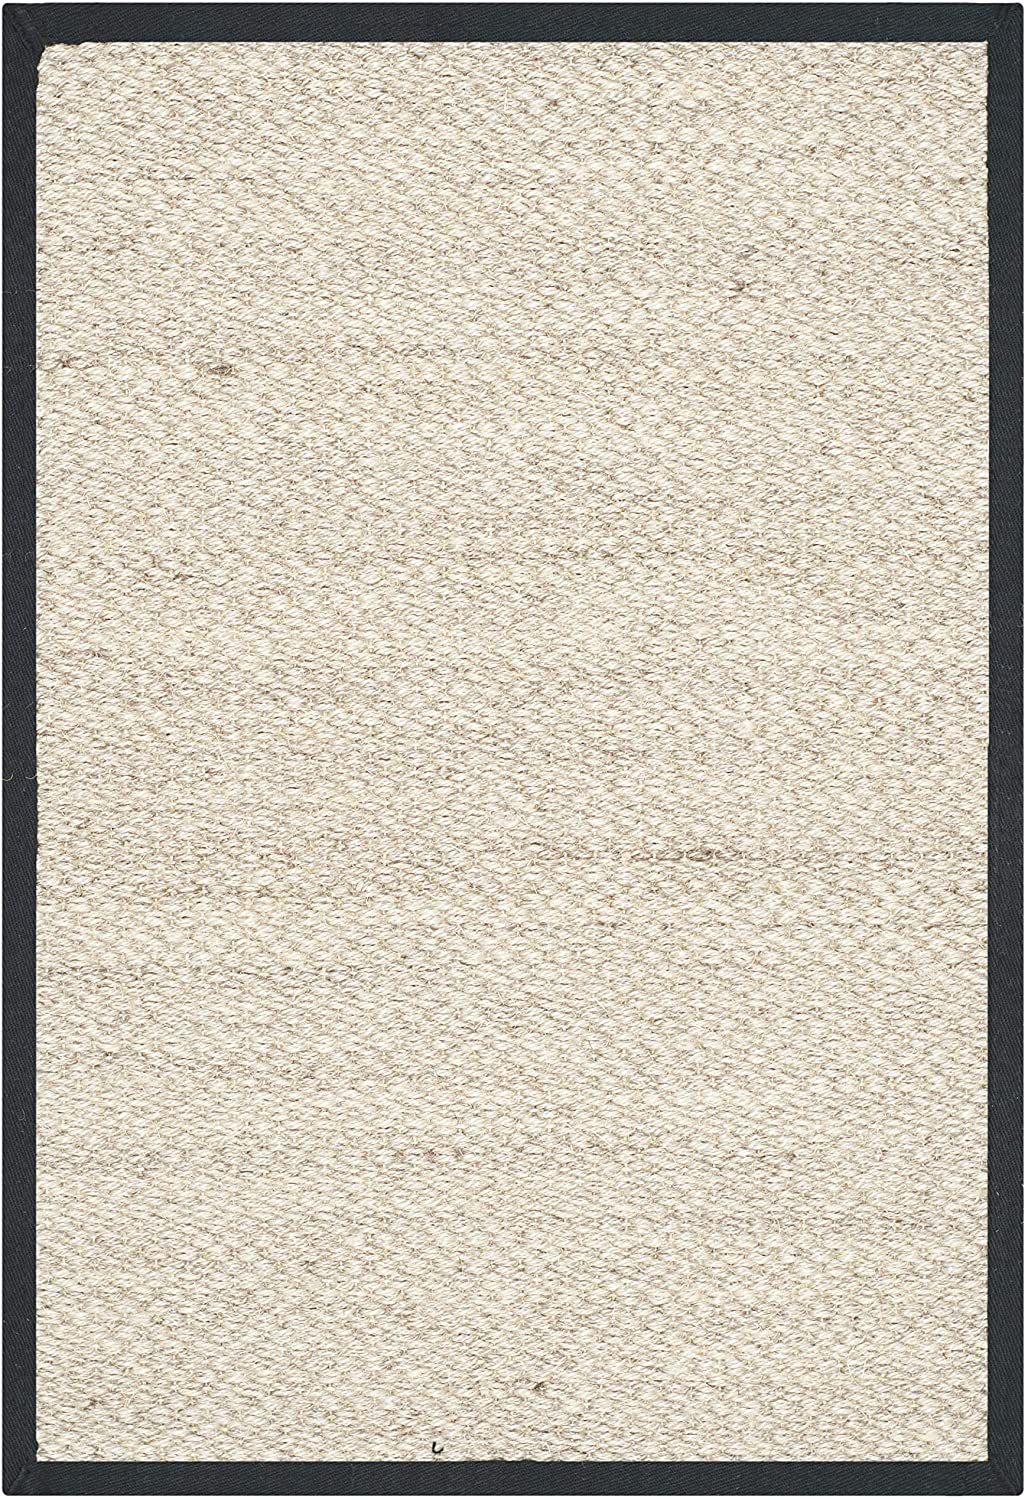 Safavieh Natural Fiber Collection NF143A Border Sisal Accent Rug, 2'6" x 4', Marble / Black